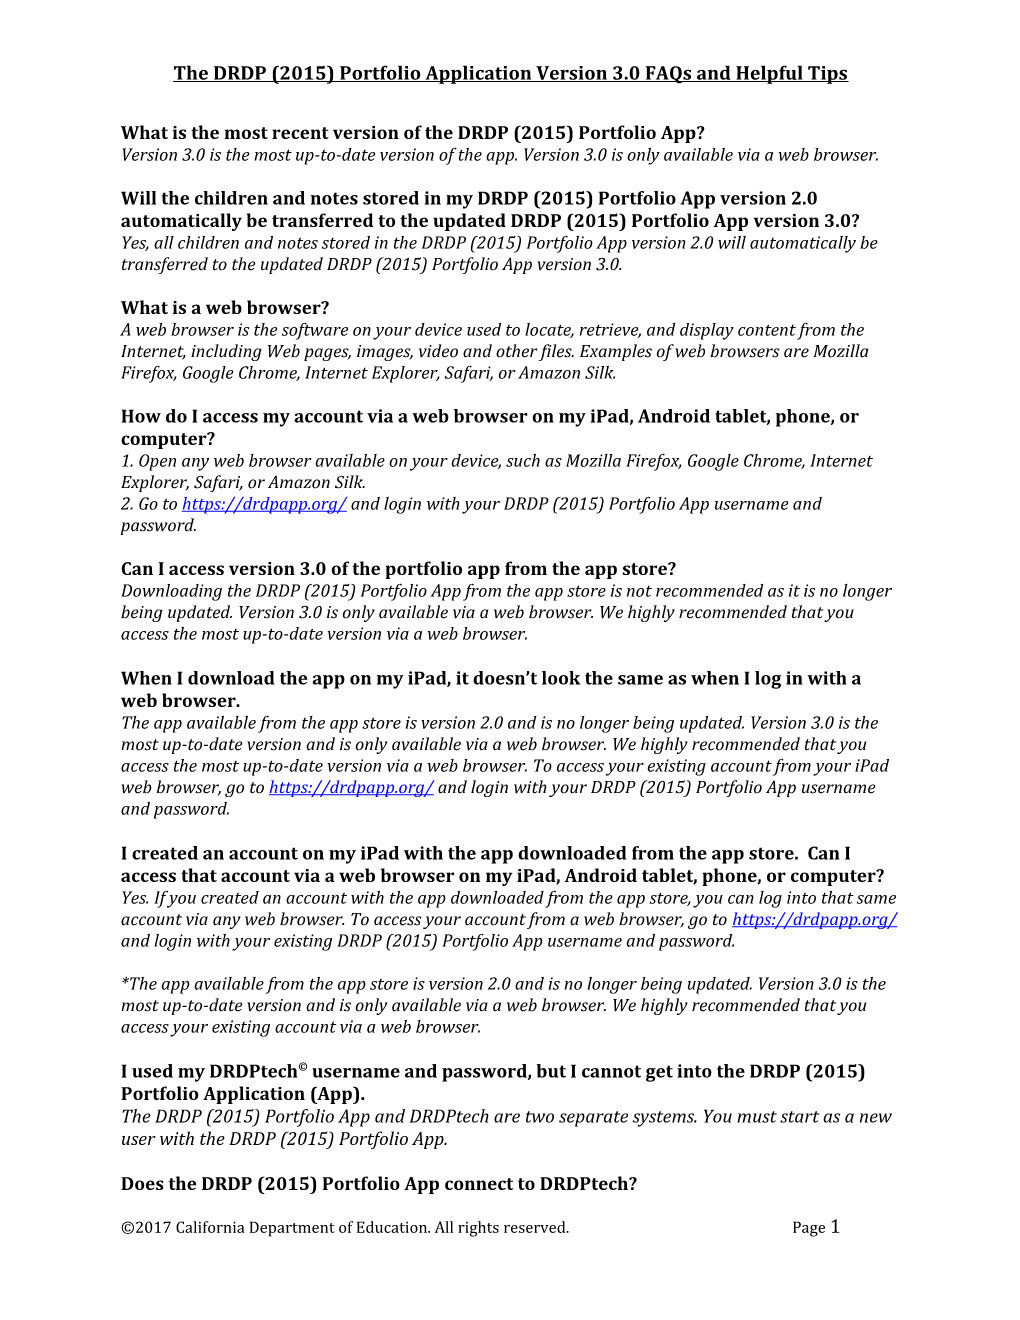 The DRDP (2015) Portfolio Application Version 3.0 Faqs and Helpful Tips